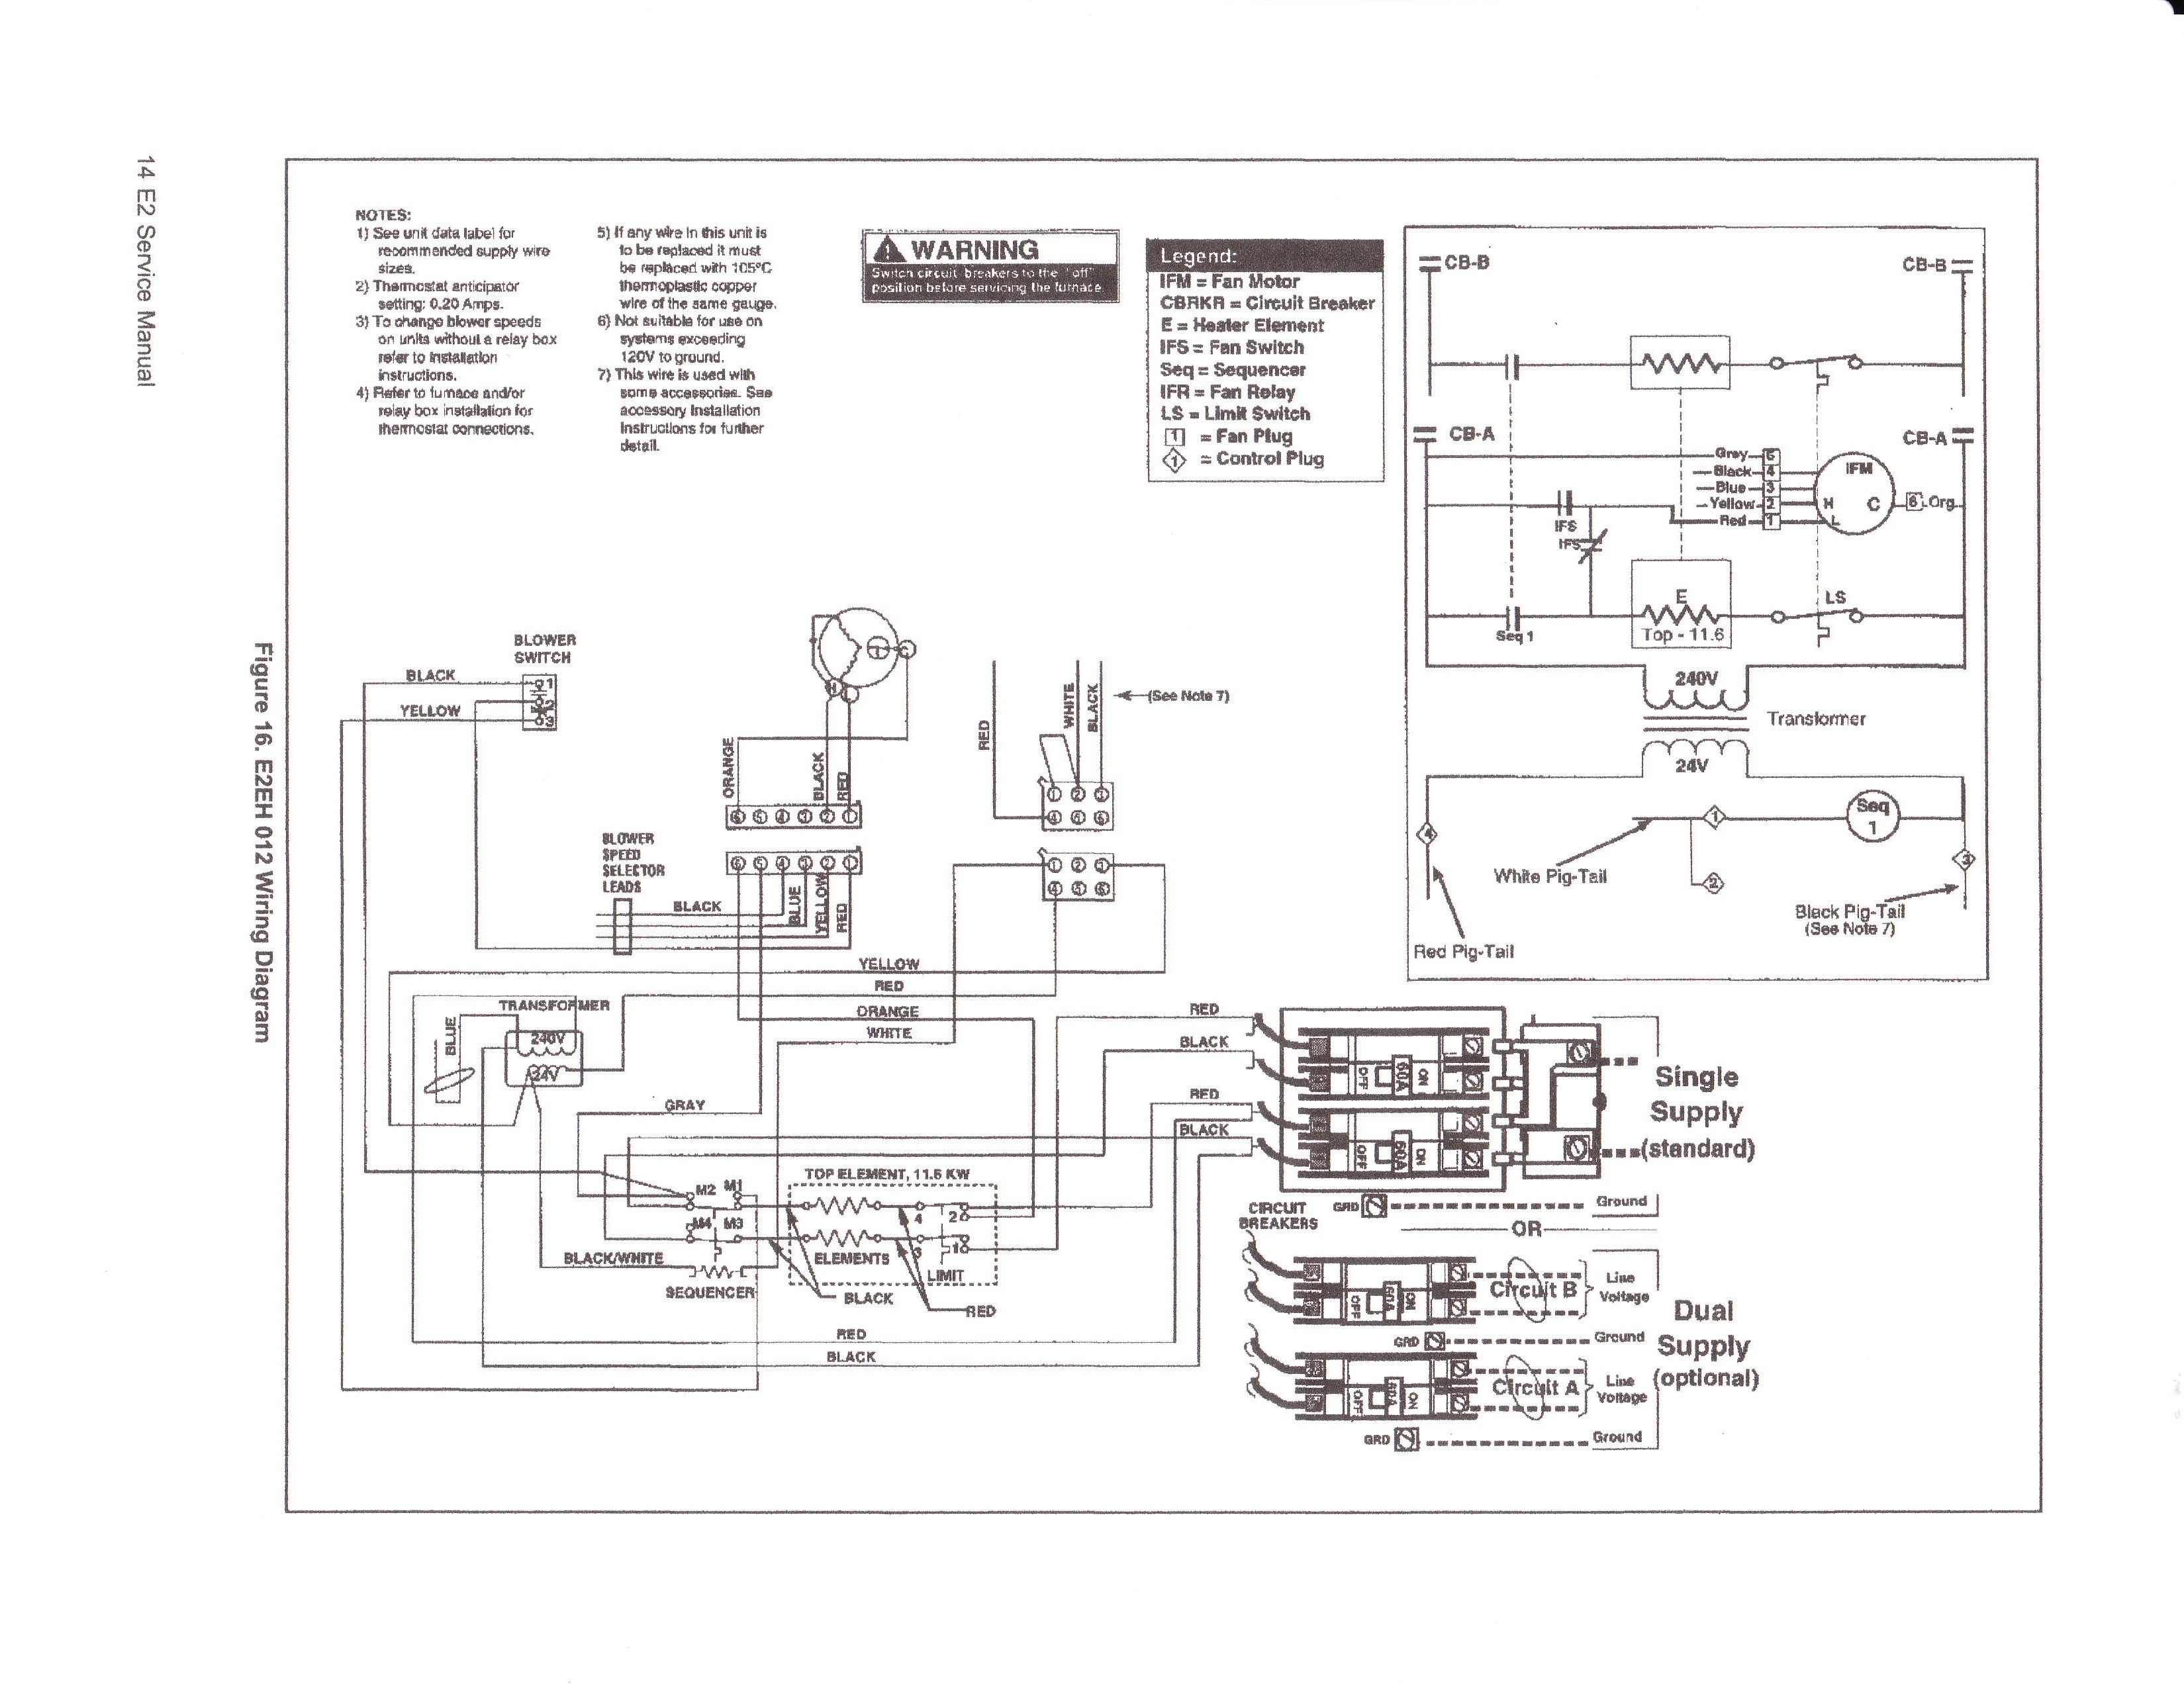 Awesome Coleman Electric Furnace Wiring Diagram